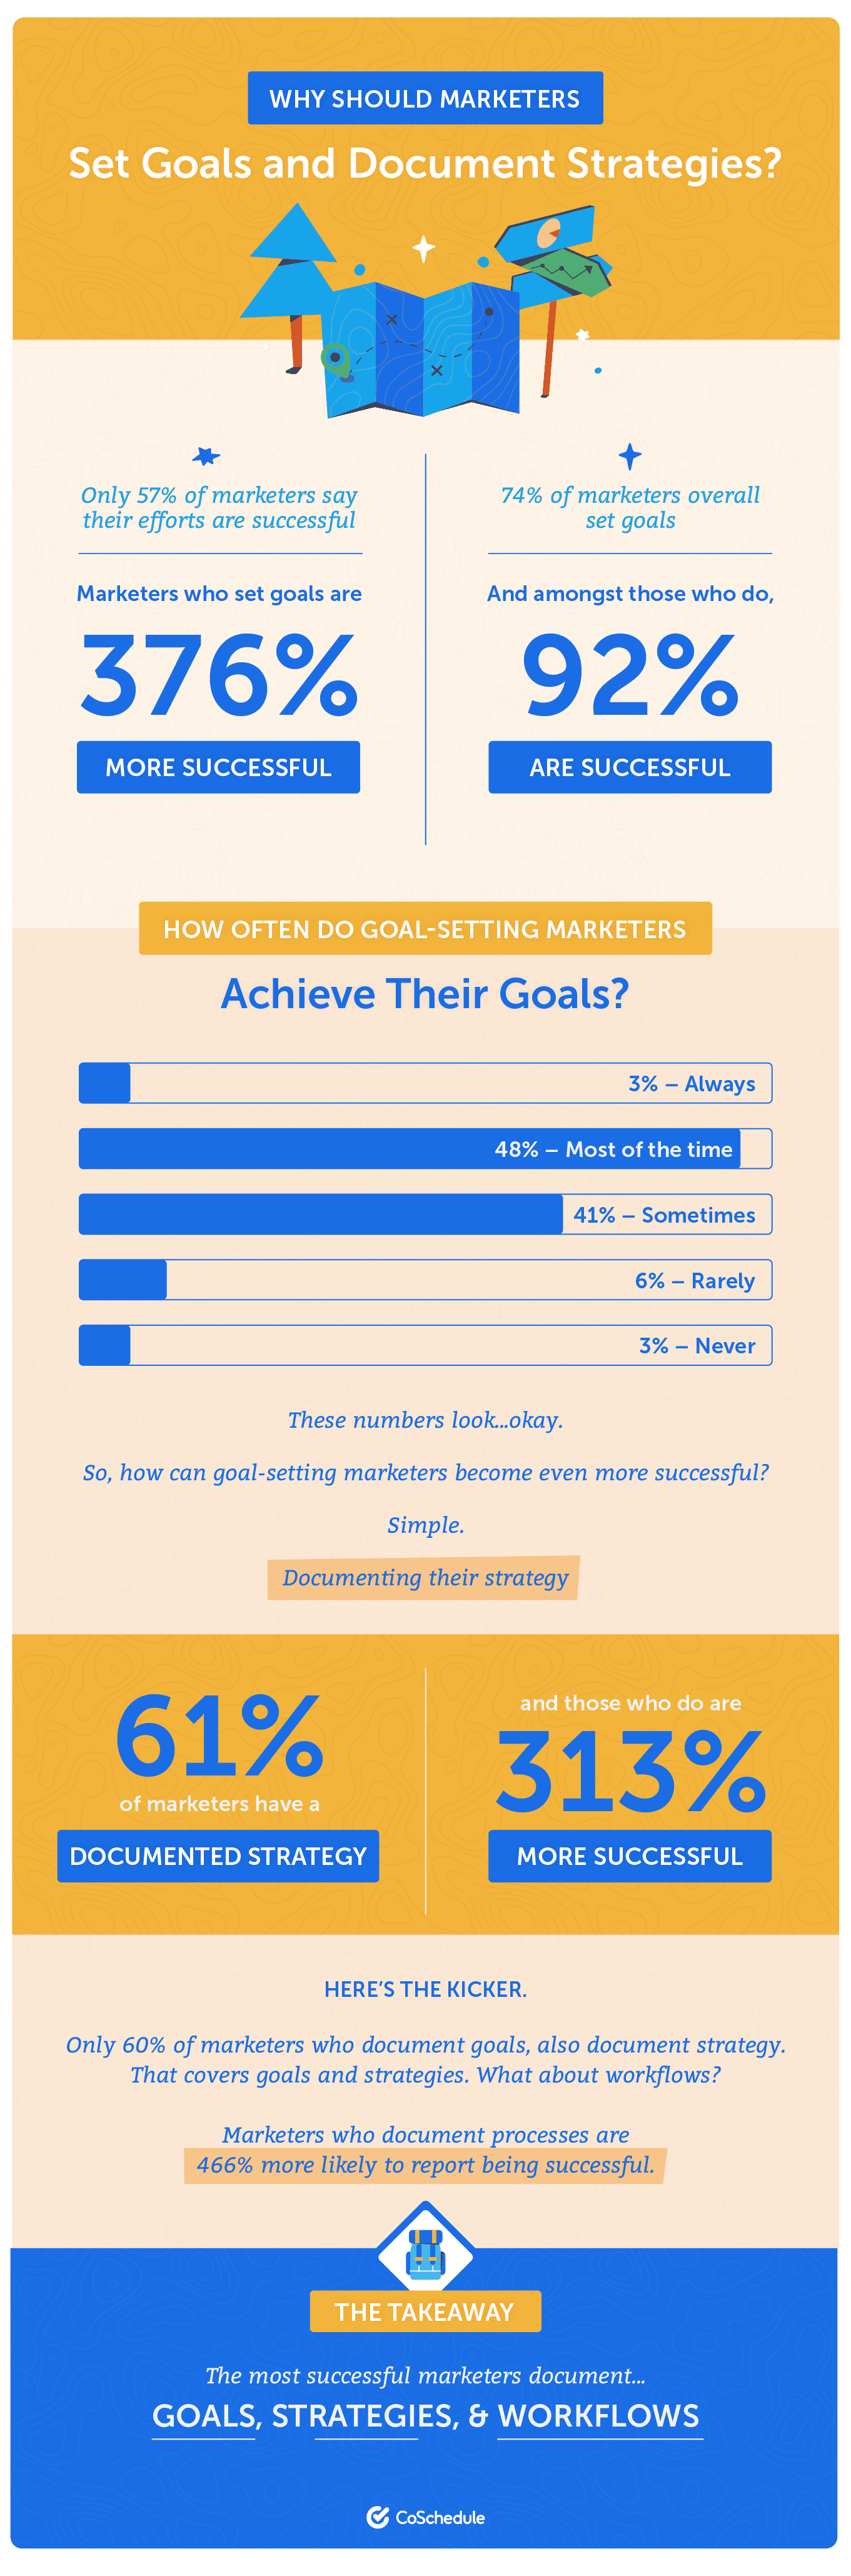 How To Set Smart Marketing Goals You Can Achieve